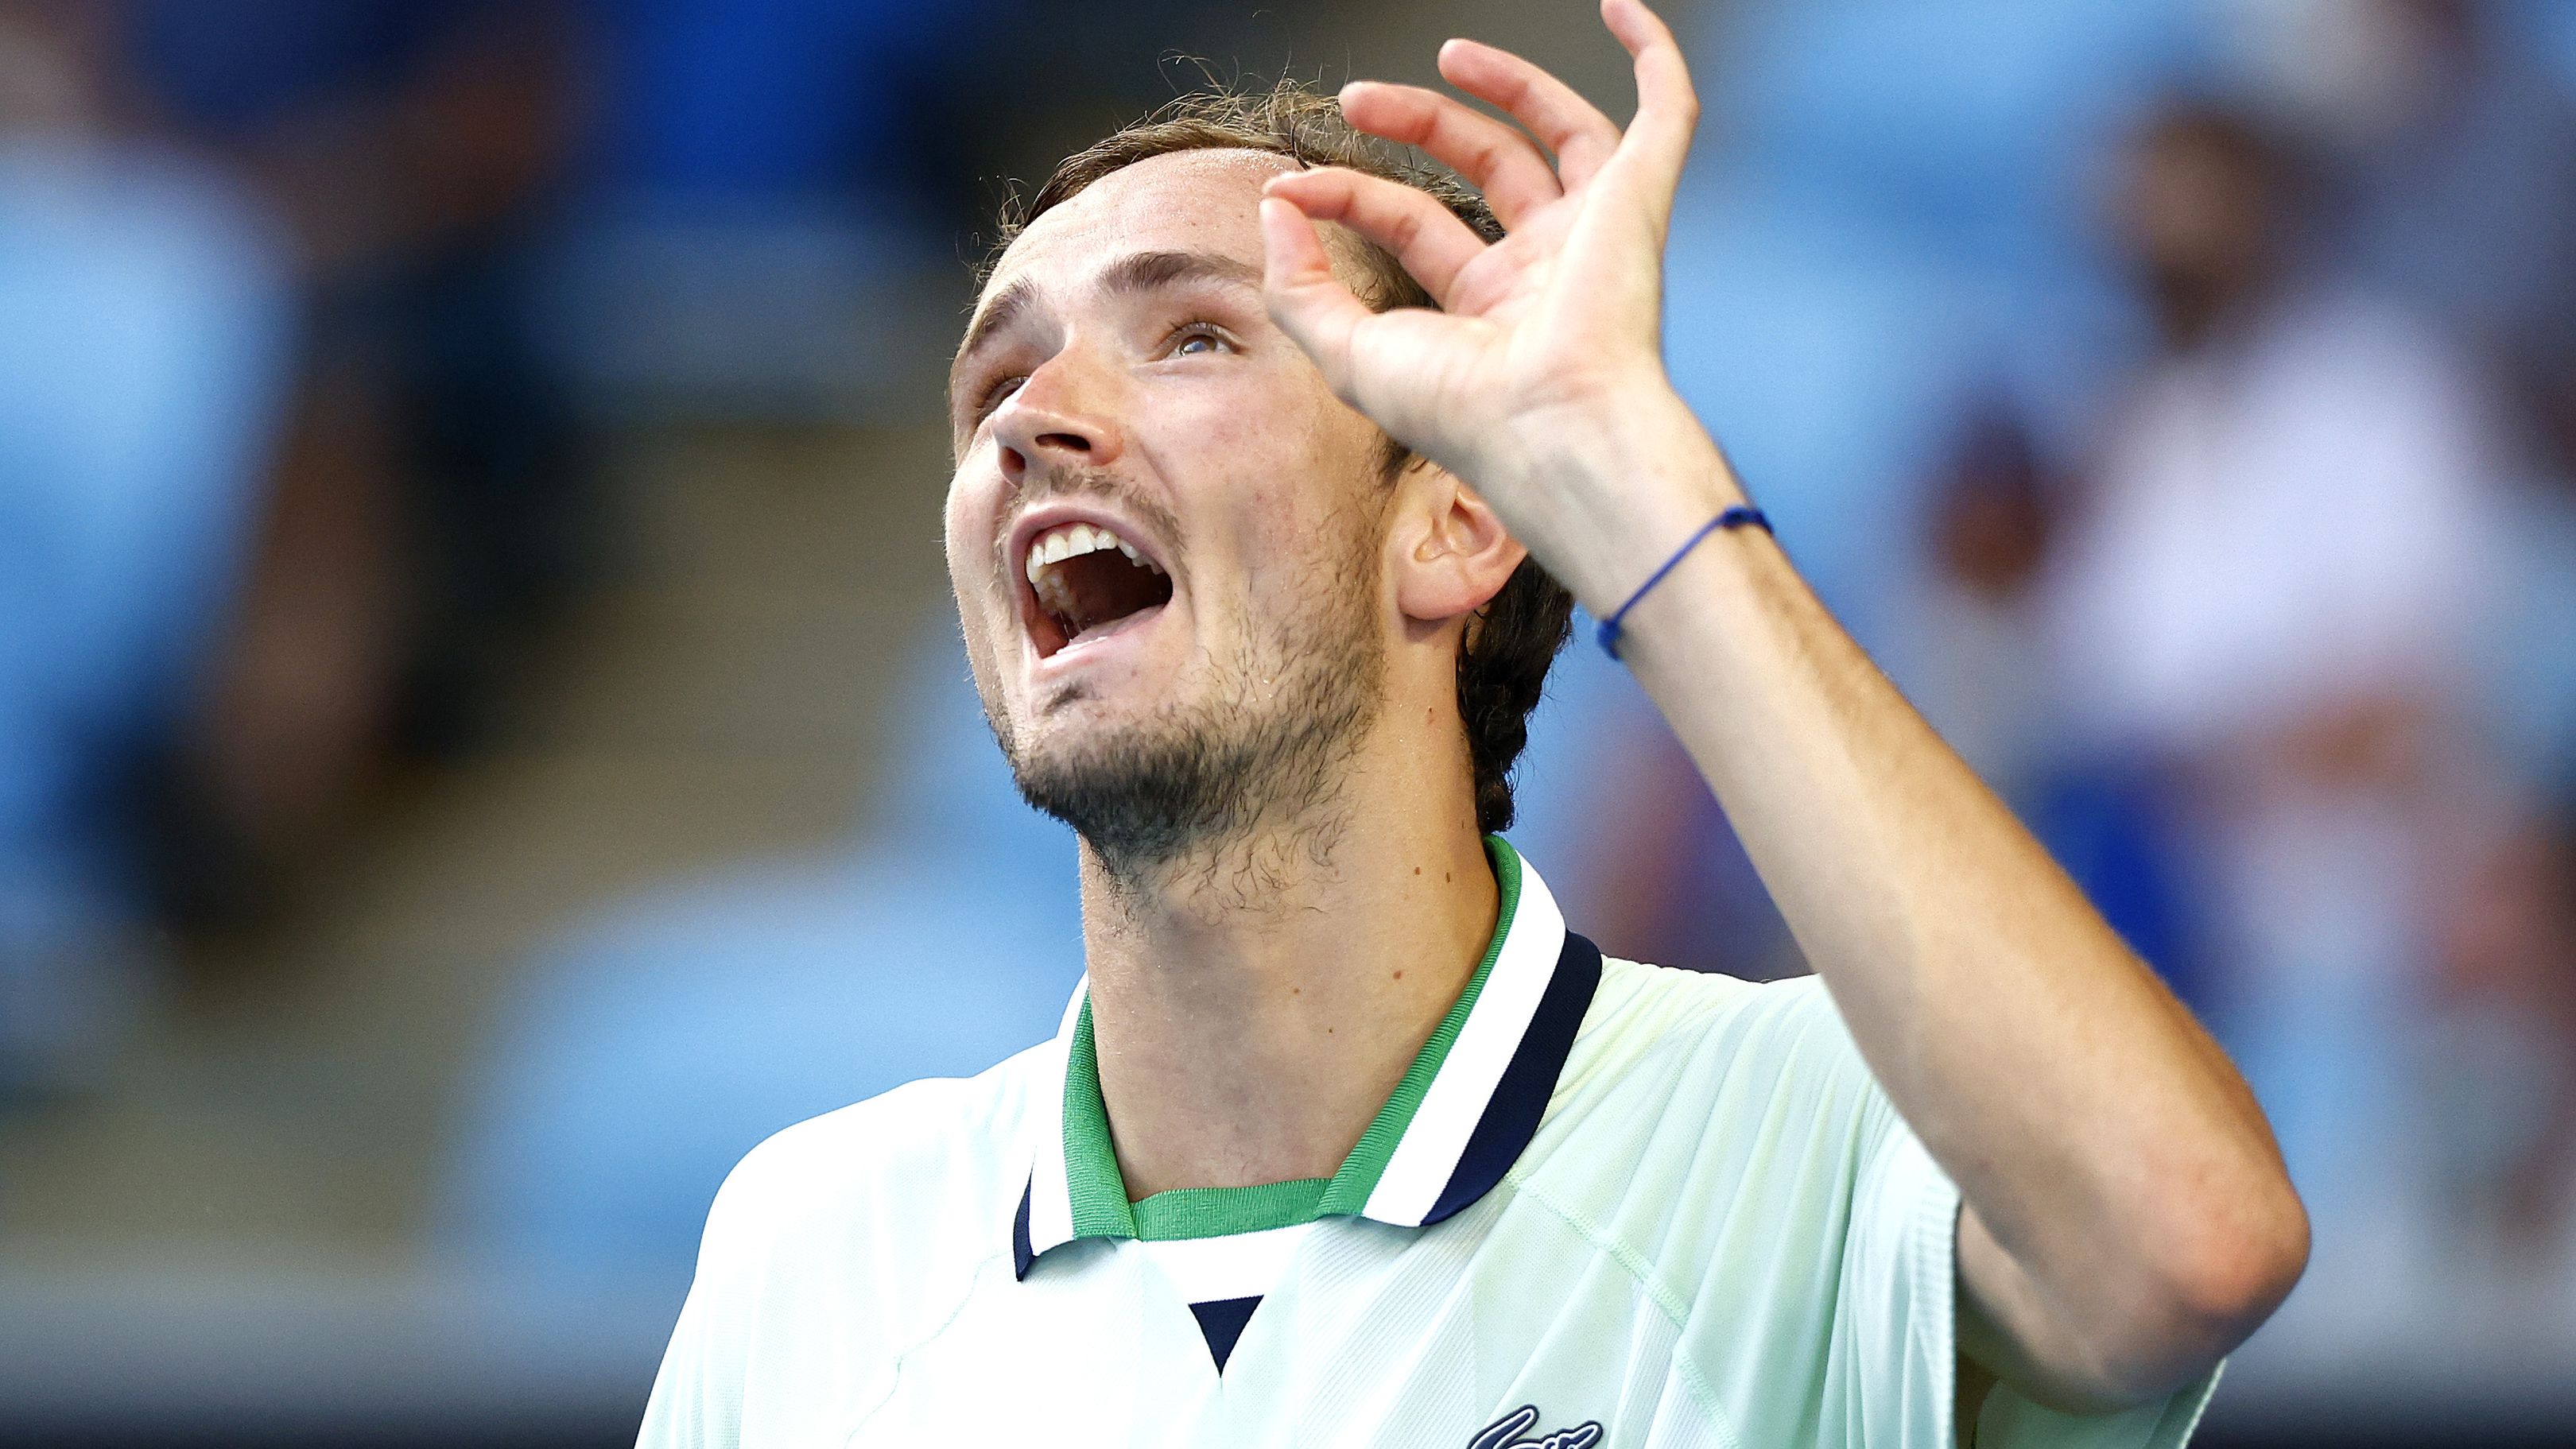 Daniil Medvedev of Russia reacts during his fourth round singles match against Maxime Cressy of the United States.